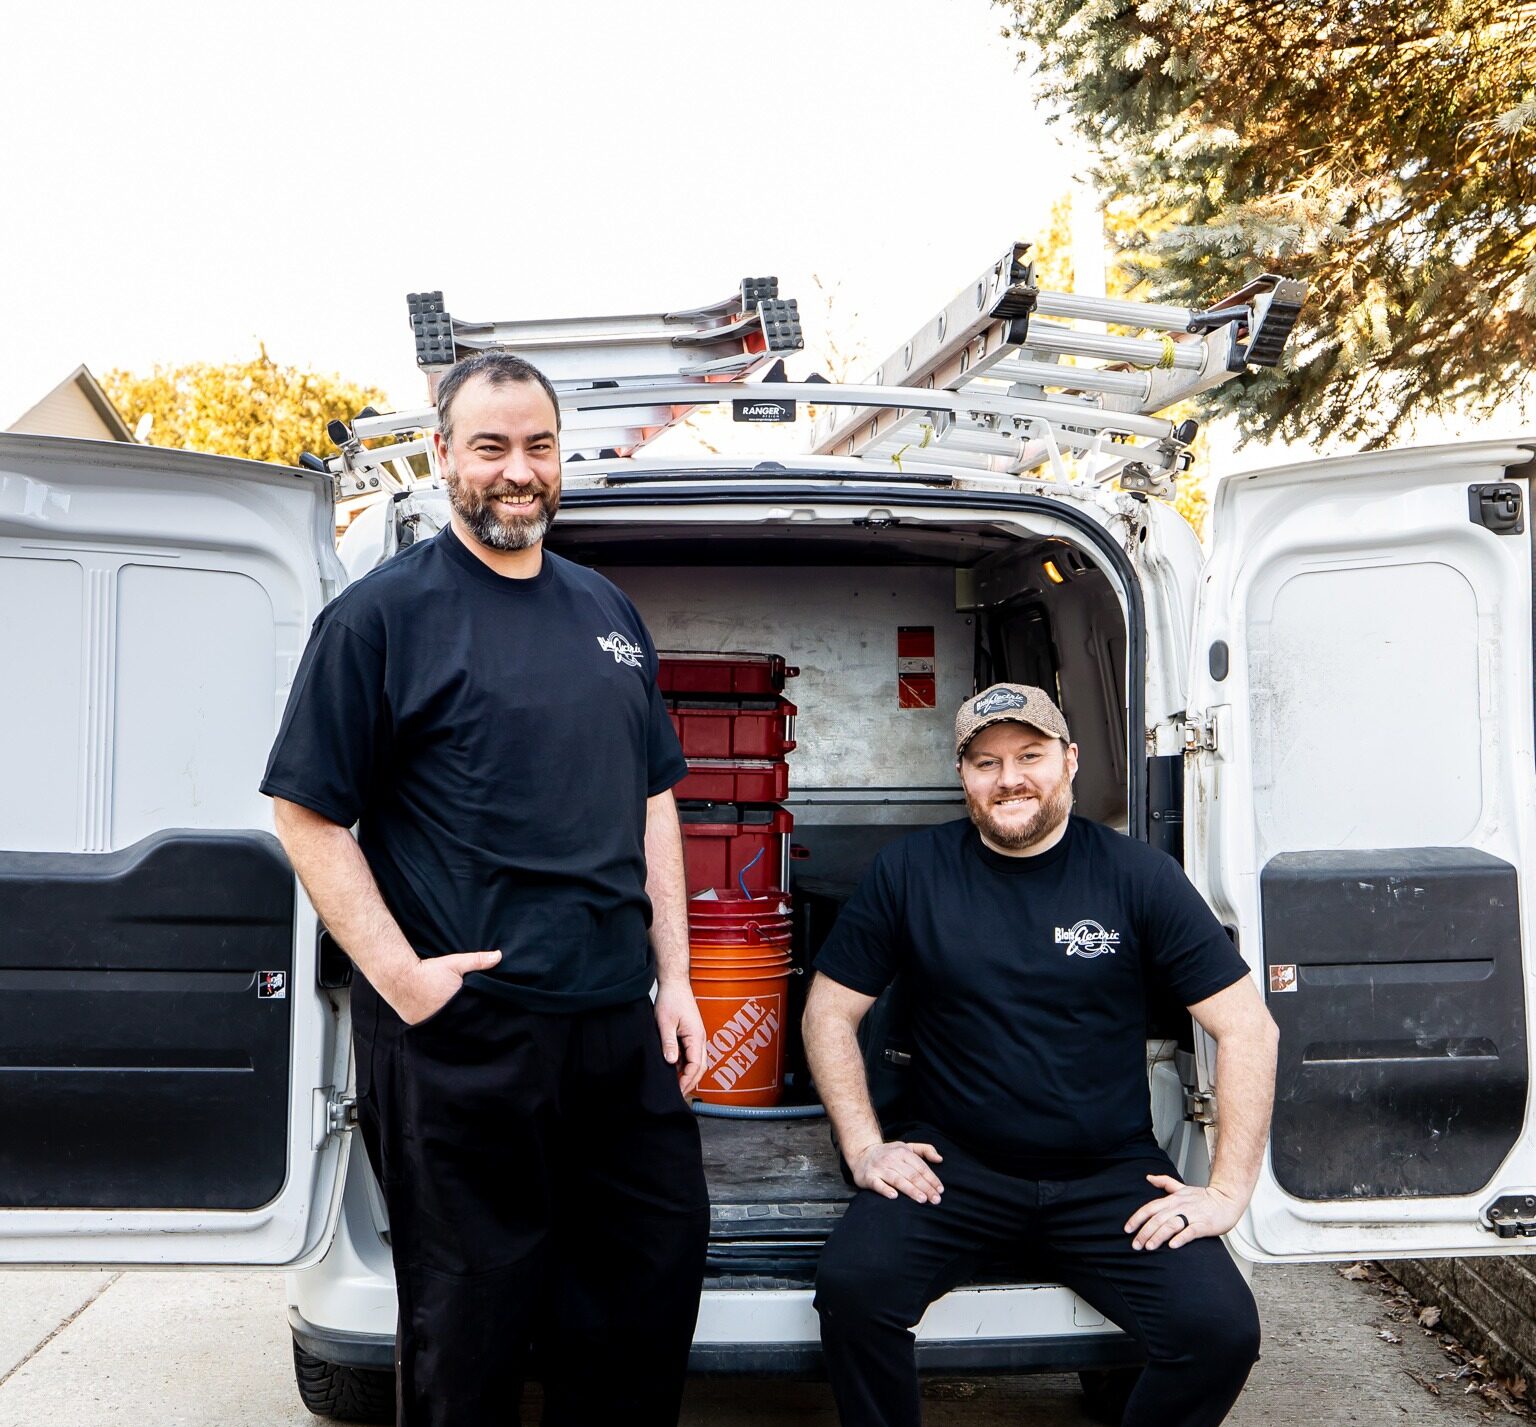 Two people are posing with a smile in front of an open utility van equipped with ladders and tools, suggesting they are professional service or trade workers.